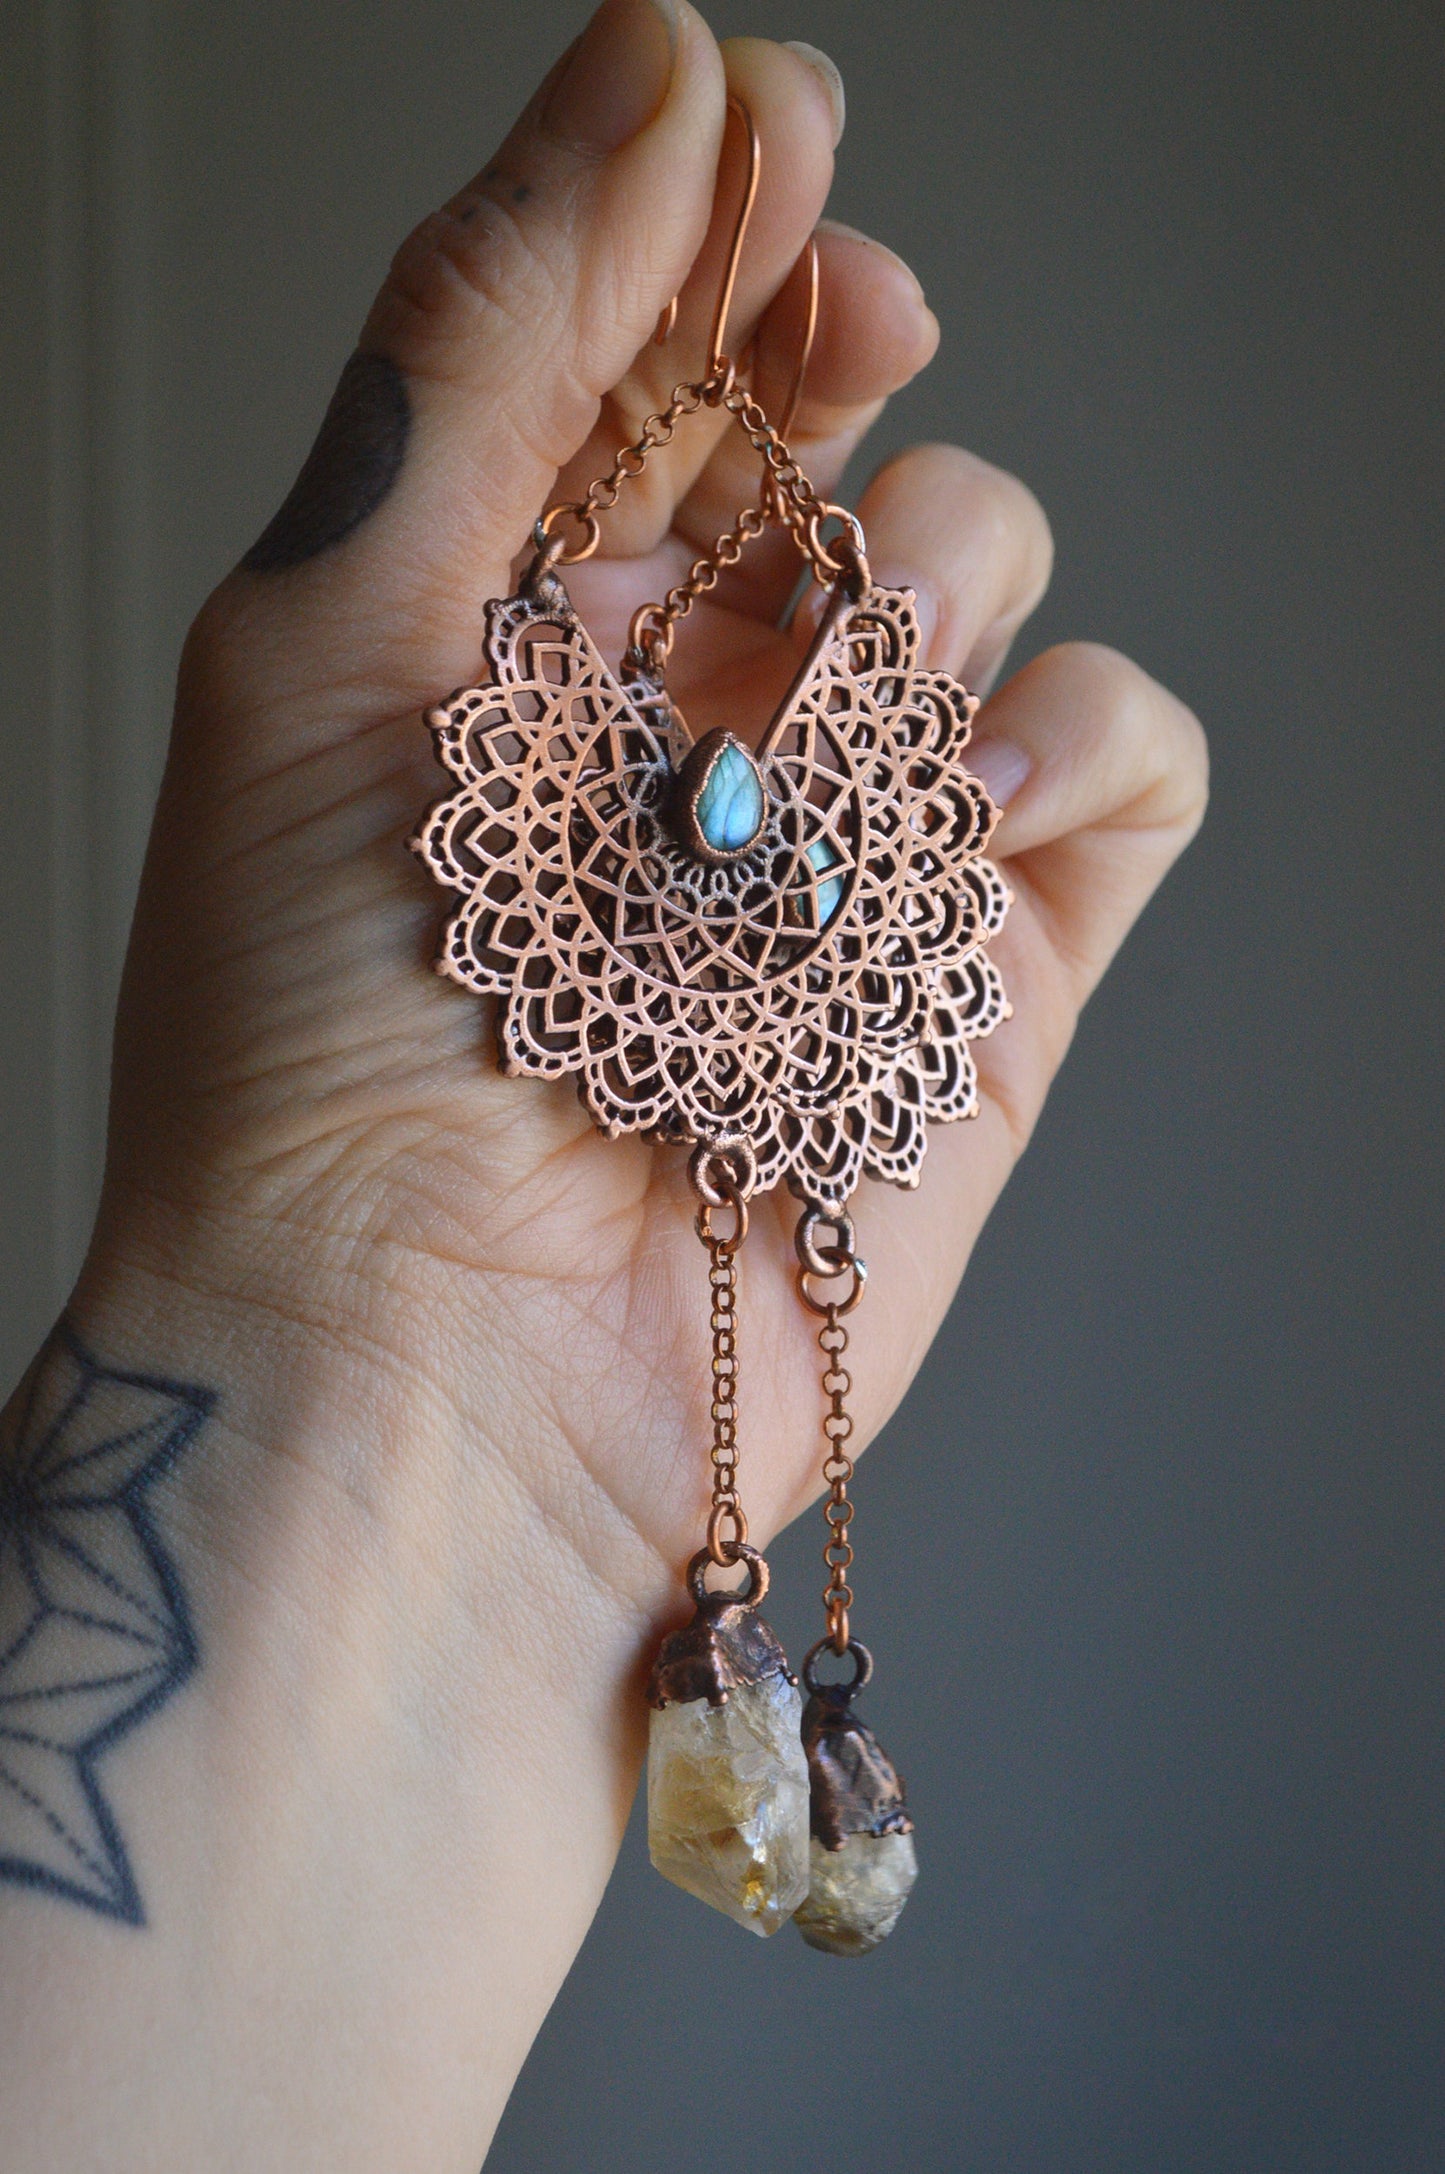 Extra long dangling earrings or ear weights with citrine and labradorite. Copper stretched lobes jewellery